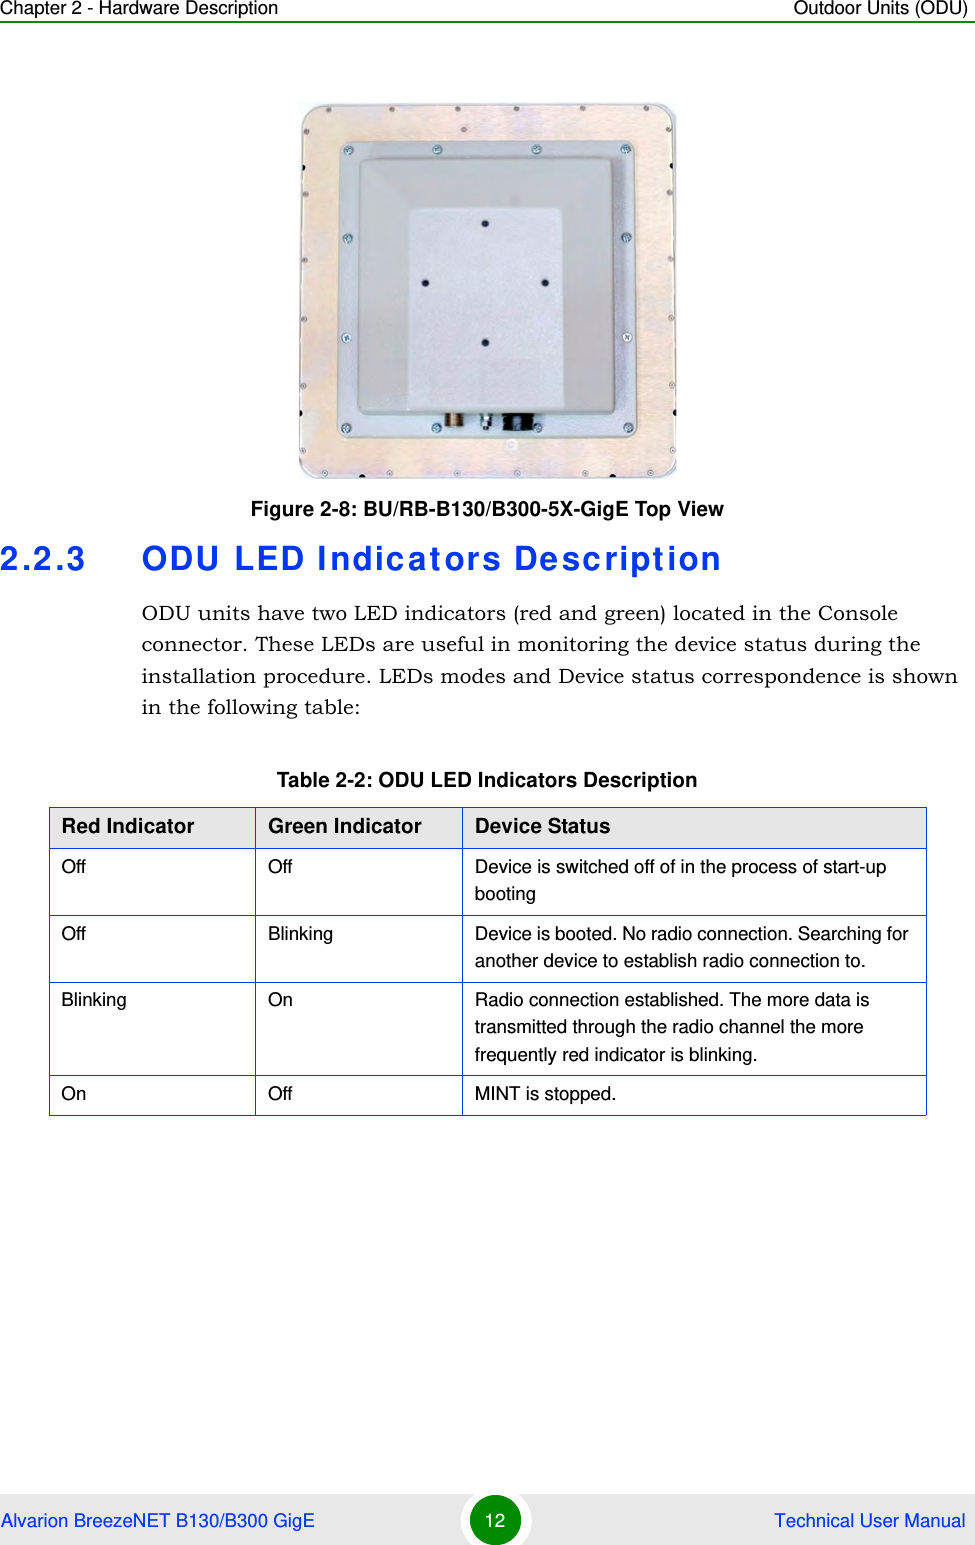 Chapter 2 - Hardware Description Outdoor Units (ODU)Alvarion BreezeNET B130/B300 GigE 12  Technical User Manual2.2.3 ODU LED Indicators DescriptionODU units have two LED indicators (red and green) located in the Console connector. These LEDs are useful in monitoring the device status during the installation procedure. LEDs modes and Device status correspondence is shown in the following table:Figure 2-8: BU/RB-B130/B300-5X-GigE Top ViewTable 2-2: ODU LED Indicators DescriptionRed Indicator Green Indicator Device StatusOff Off Device is switched off of in the process of start-up bootingOff Blinking Device is booted. No radio connection. Searching for another device to establish radio connection to. Blinking On Radio connection established. The more data is transmitted through the radio channel the more frequently red indicator is blinking.On Off MINT is stopped.